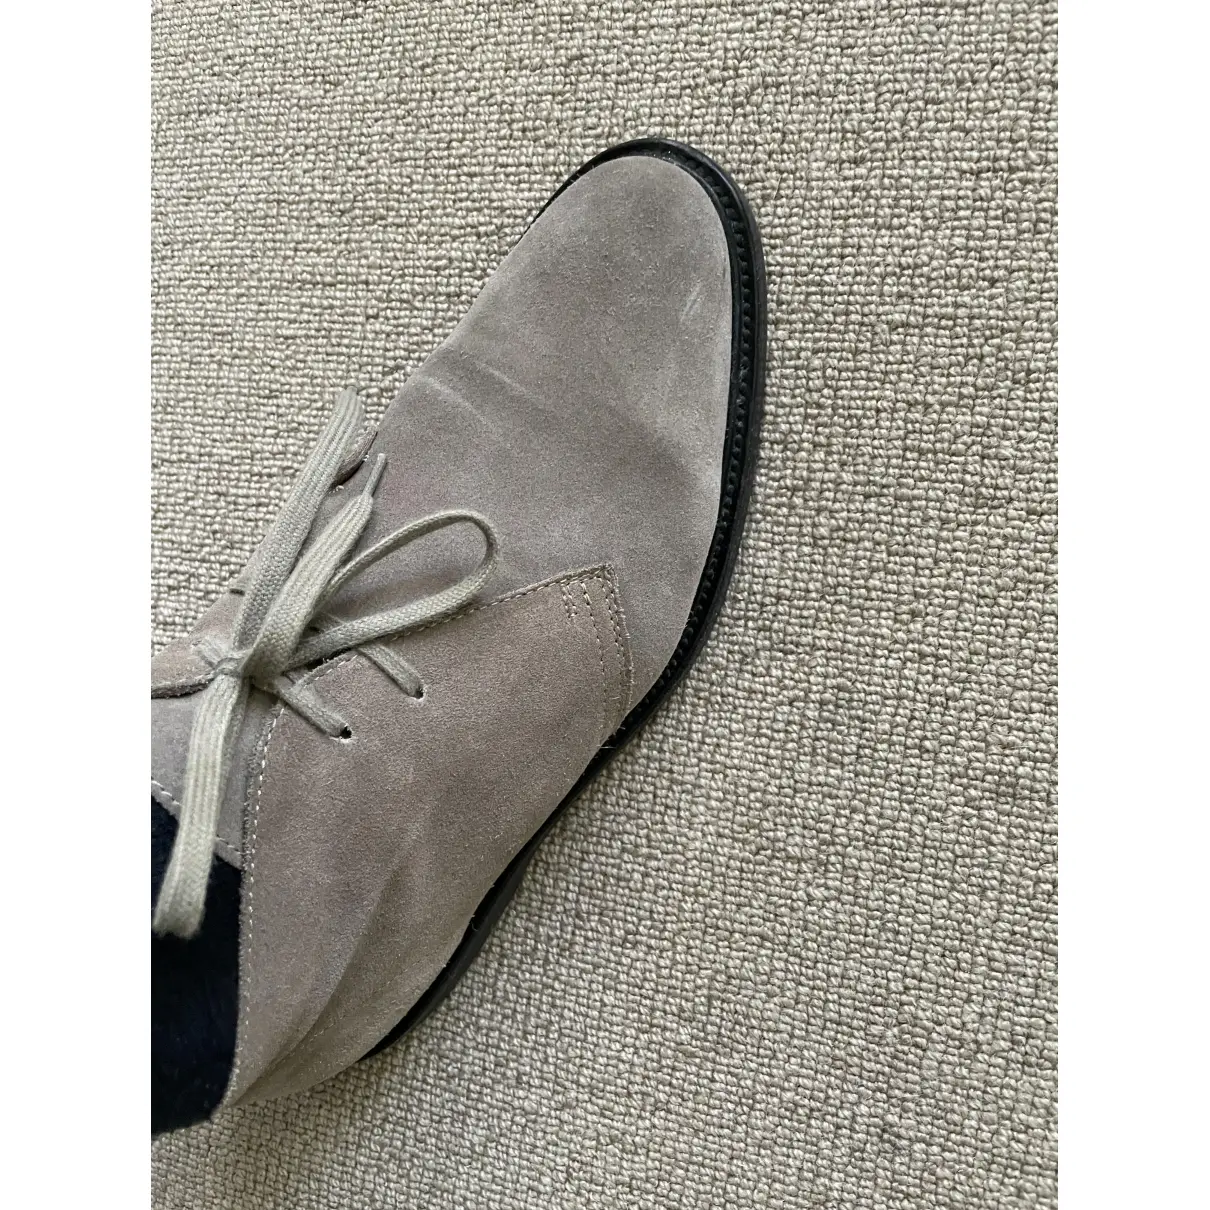 Buy Common Projects Boots online